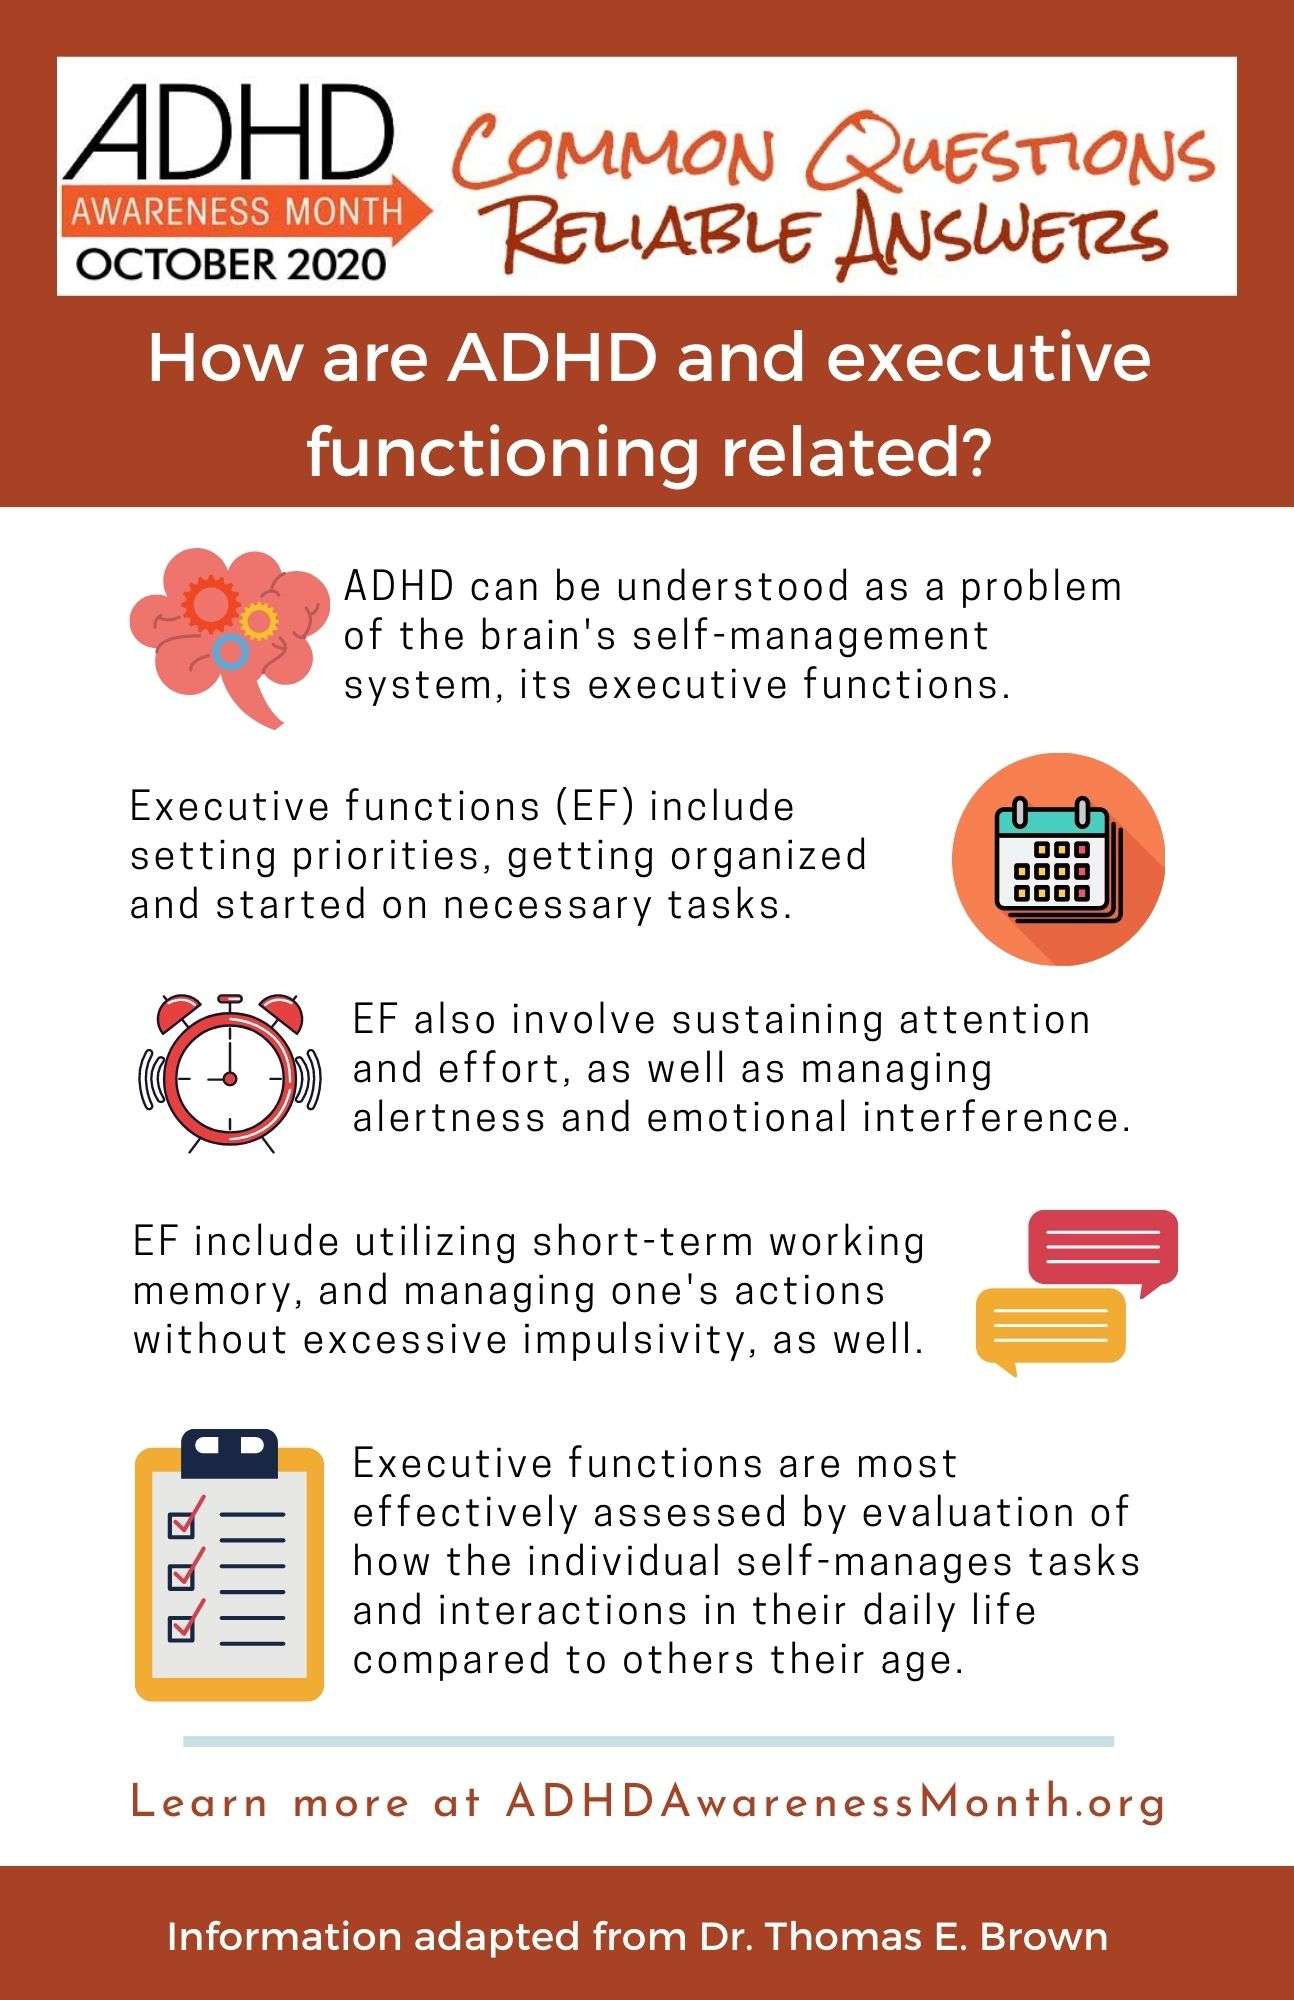 How are ADHD and executive functioning related?